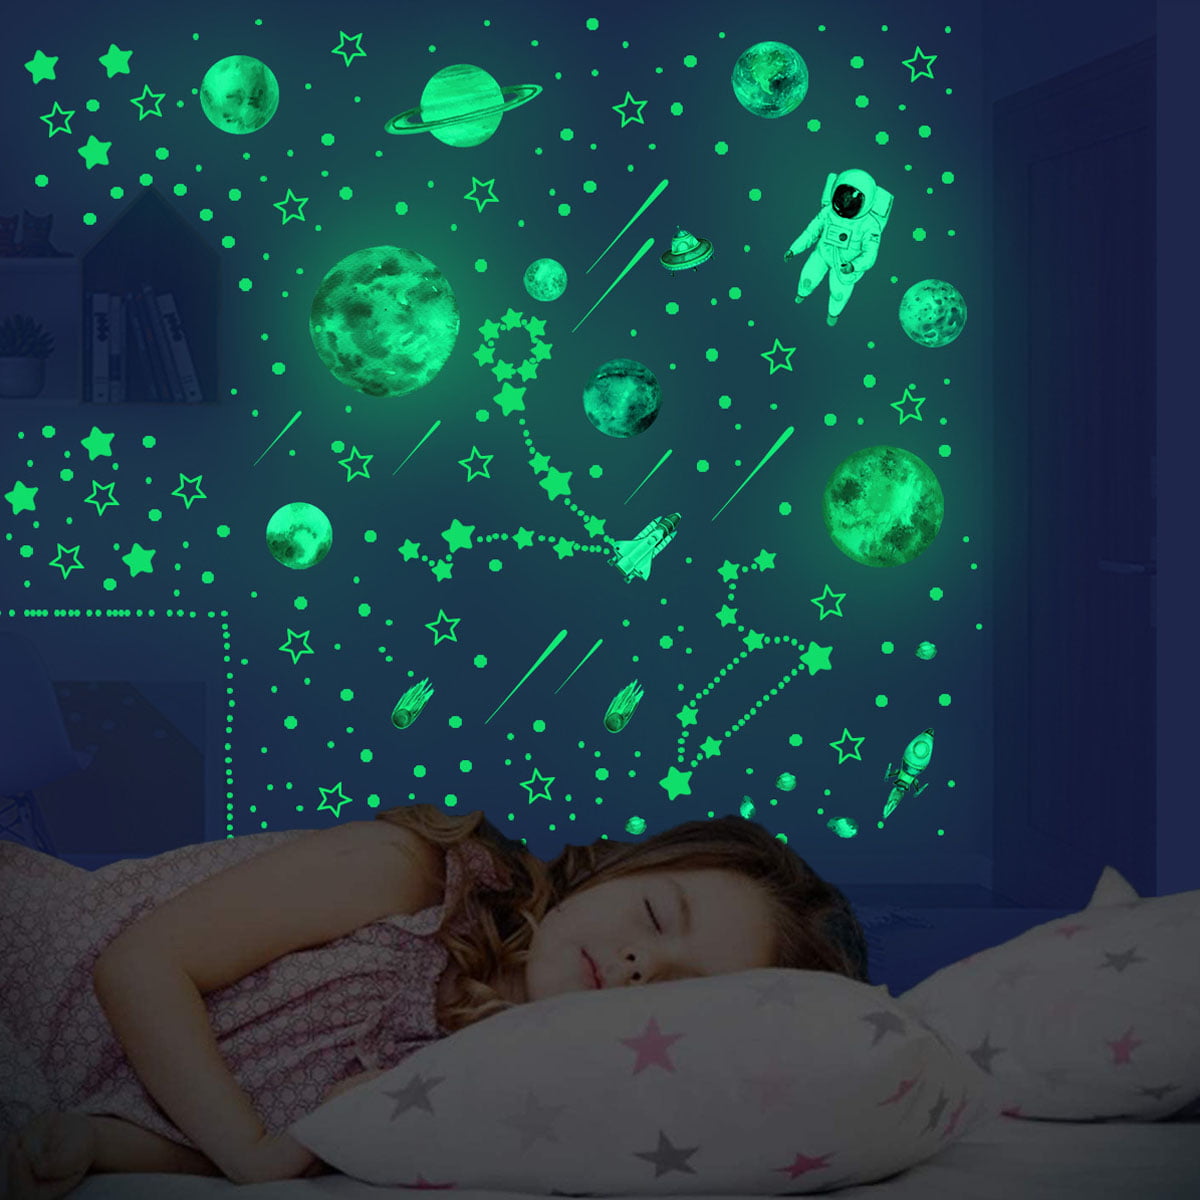 Space Wall Stickers,Space Wall Decals Planets Astronaut Rocket Spacecraft Alien Wall Decals Solar System Stickers Galaxy Universe Stars Decal for Kids Boys Girls Toddler Nursery Bedroom Decor 